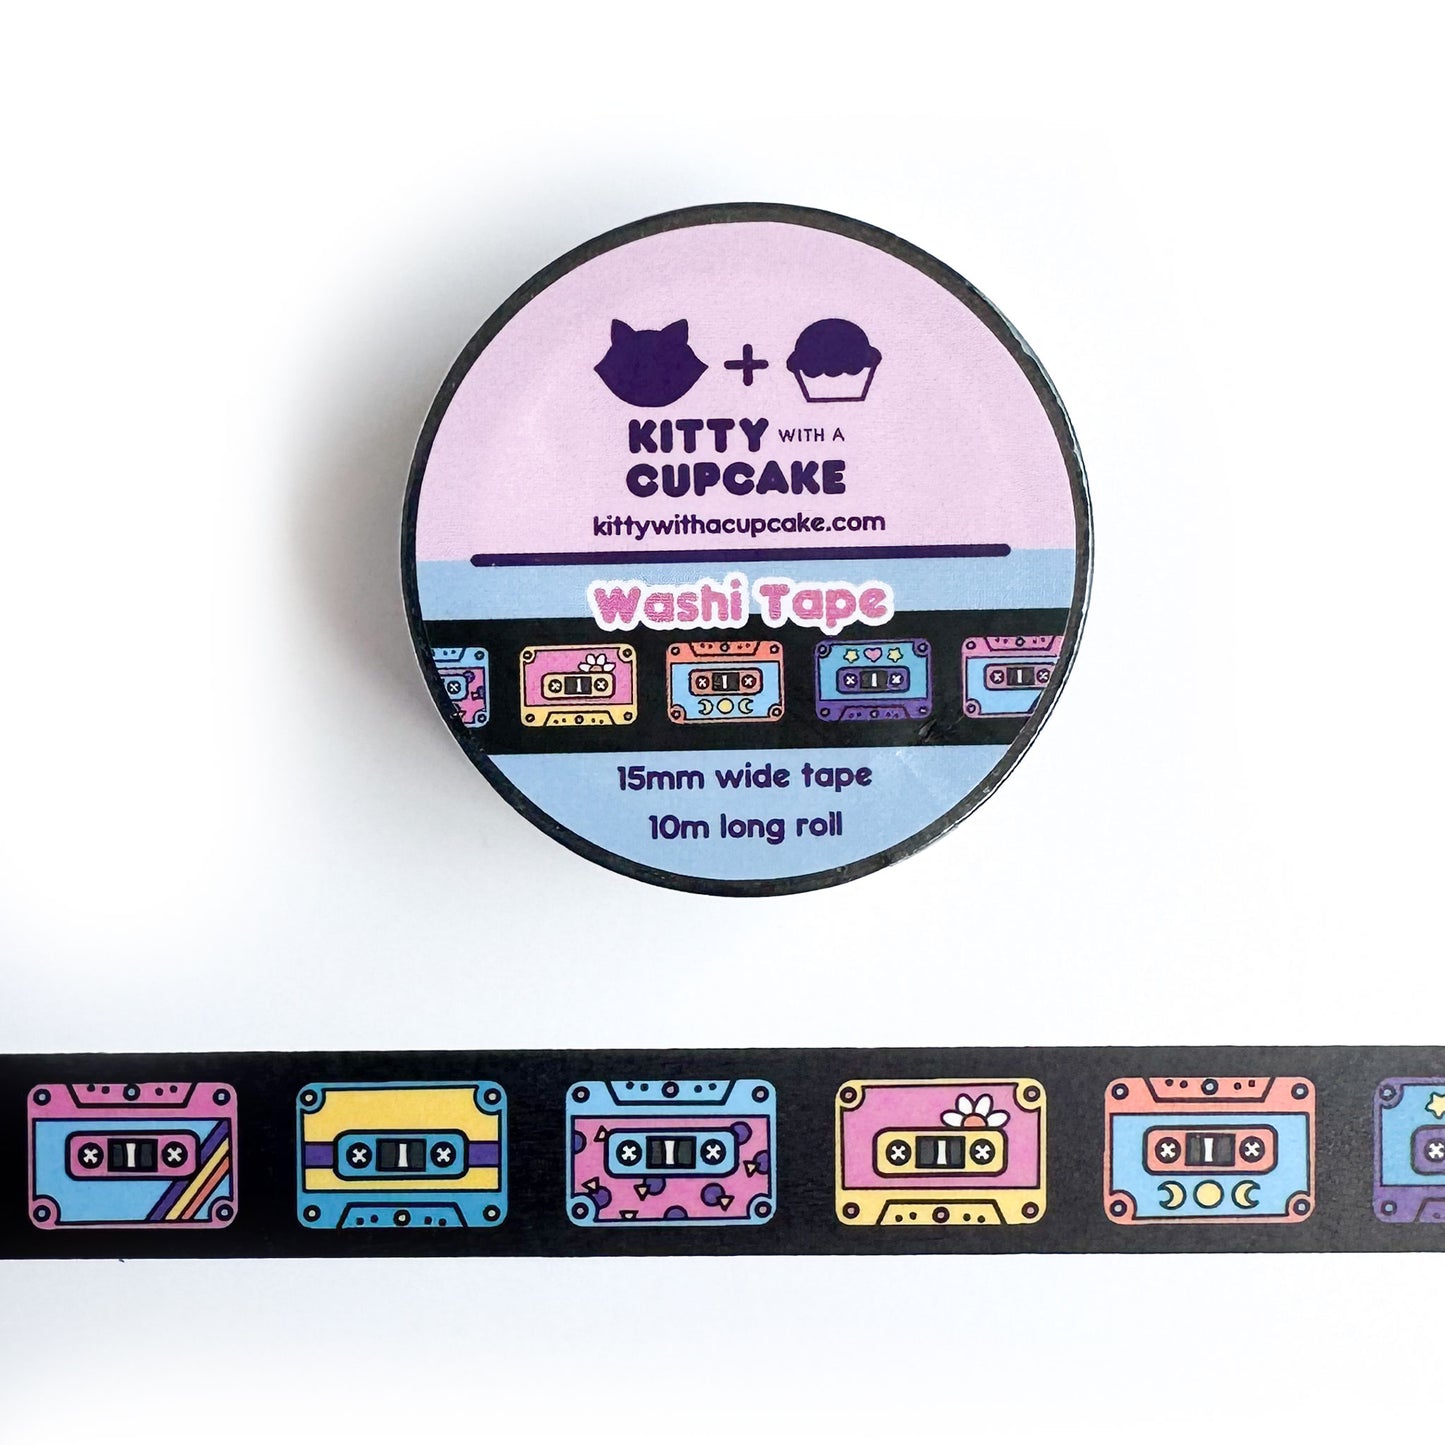 A circular roll of washi tape with a piece of the tape stuck below it. The washi tape has a black background and has a row of colorful cassette tapes along it. 